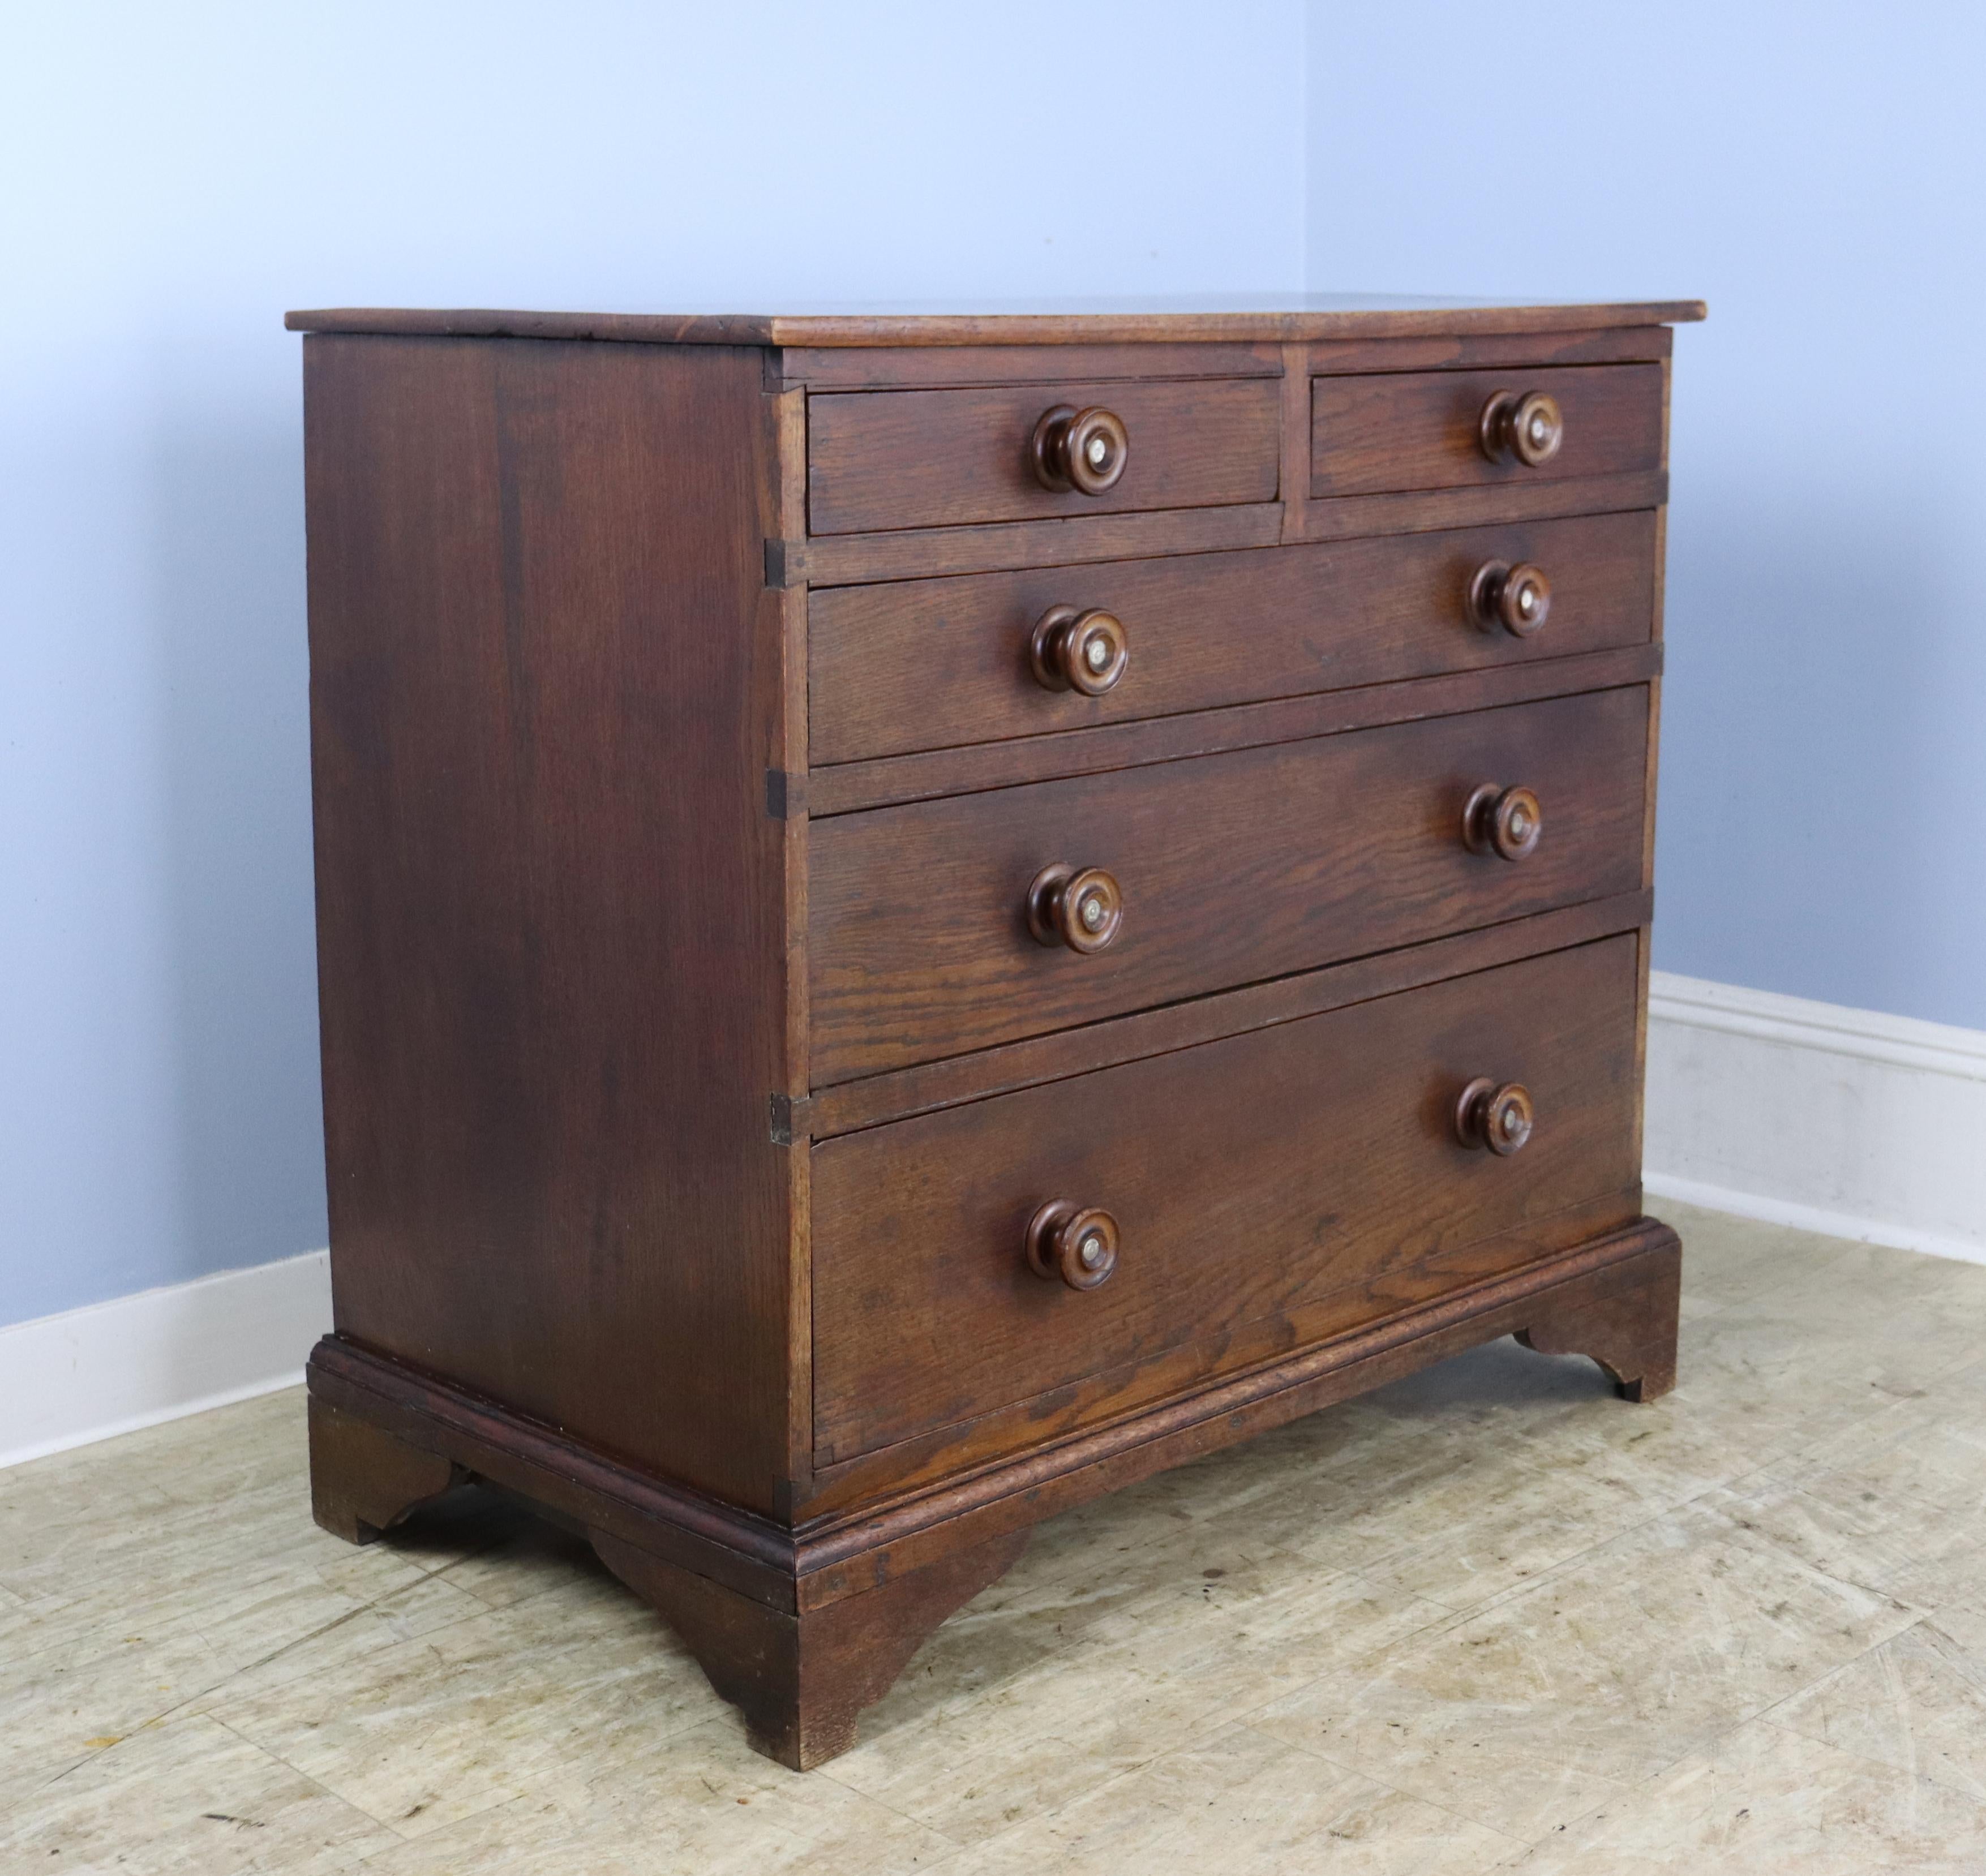 A handsome oak chest of drawers with 2 over 3 construction  Ogee feet and decorative knobs.  There is a small repair on the bottom drawer, shown in thumbnail, and some fading on the top.  Nice size for a guest or child's bedroom.